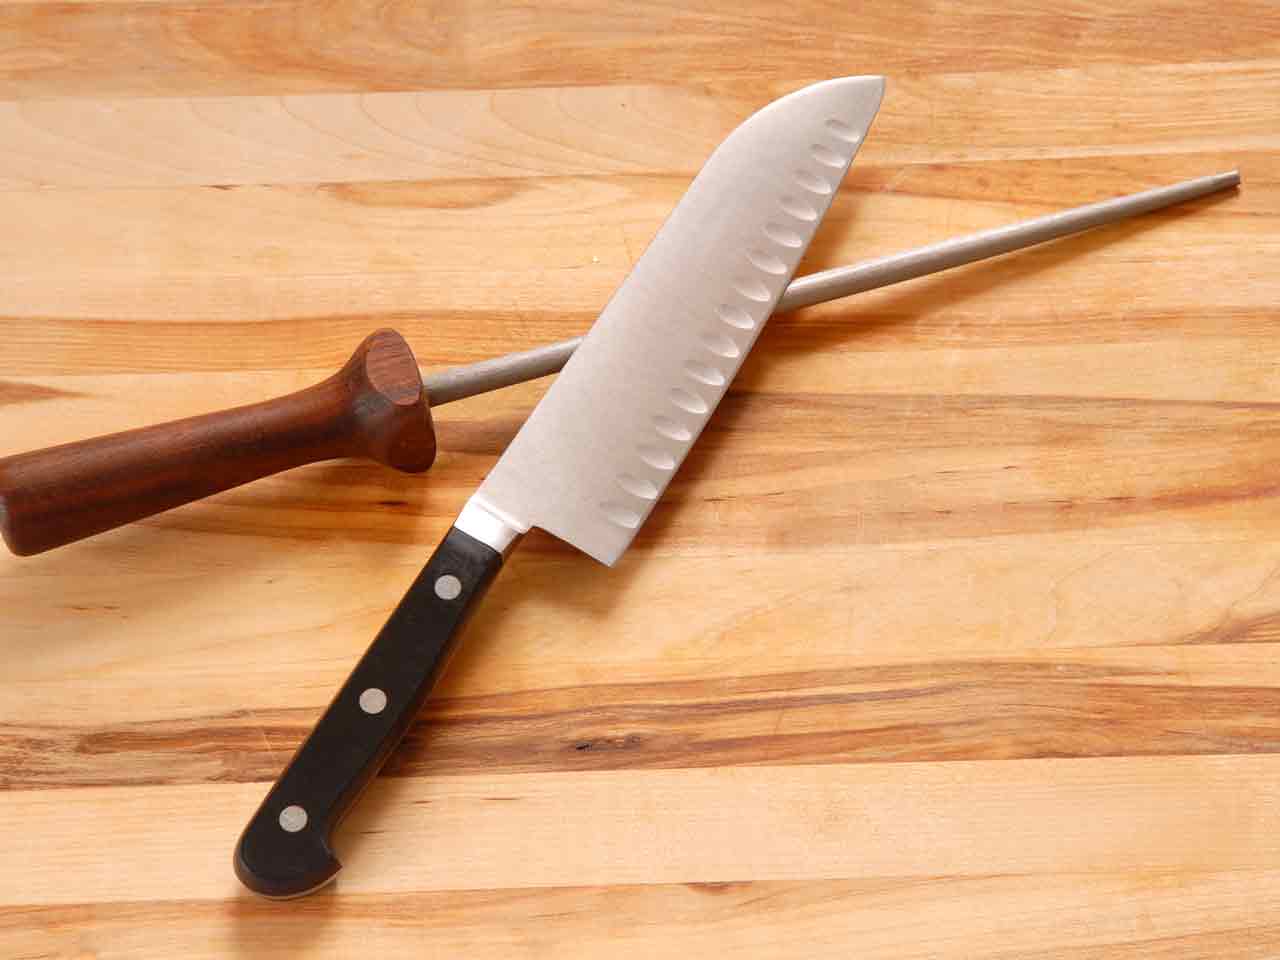 A kitchen knife and honing steel